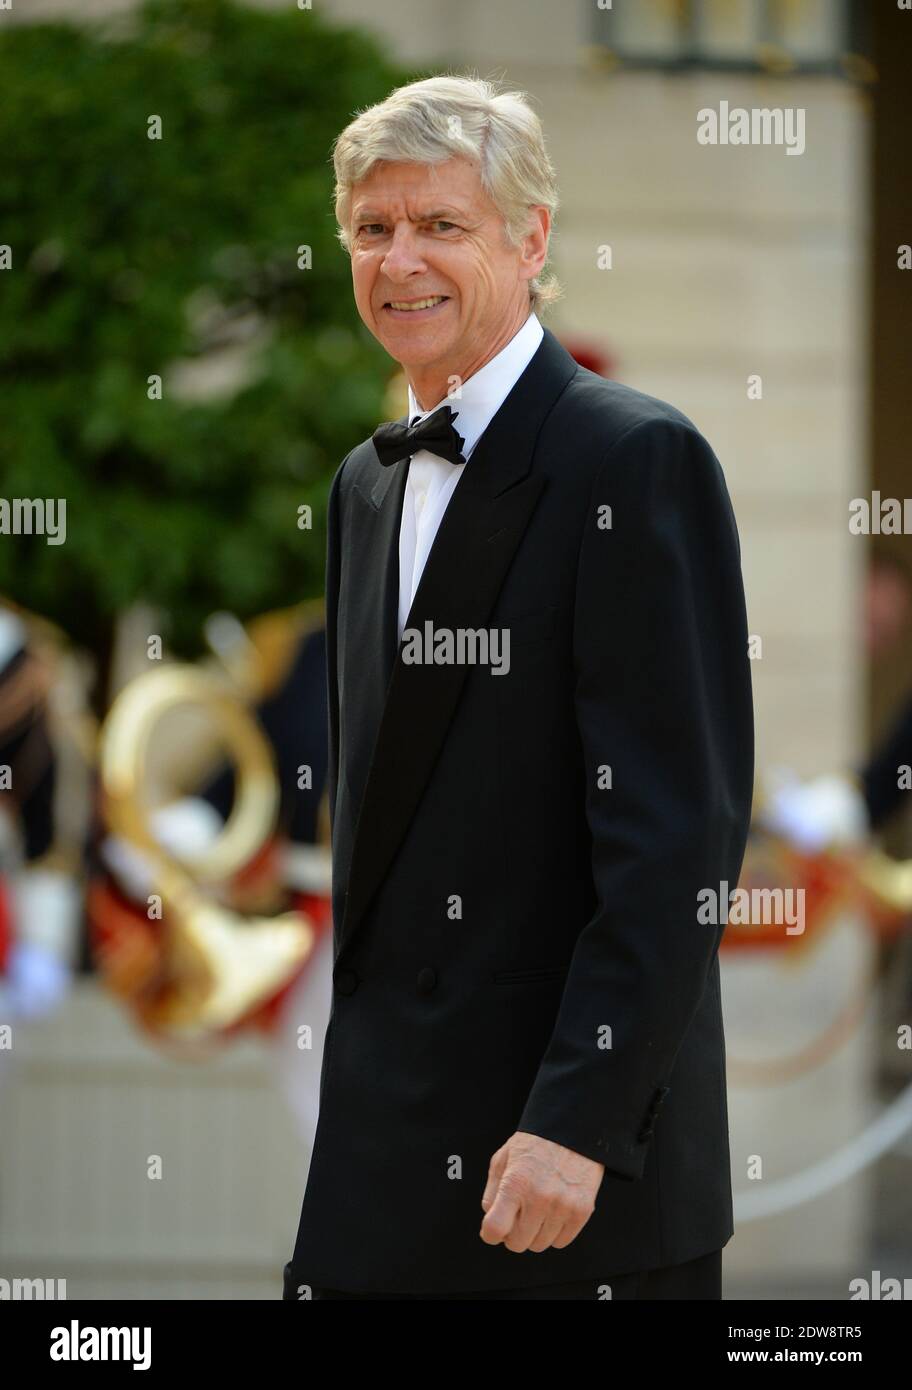 Arsenal manager Arsene Wenger attends the State Banquet given in honour of HM The Queen Elizabeth II by French President Francois Hollande at the Elysee Palace, as part of the official ceremonies of the 70th Anniversary of the D Day, on June 6, 2014, in Paris, France. Photo by Christian Liewig/ABACAPRESS.COM Stock Photo